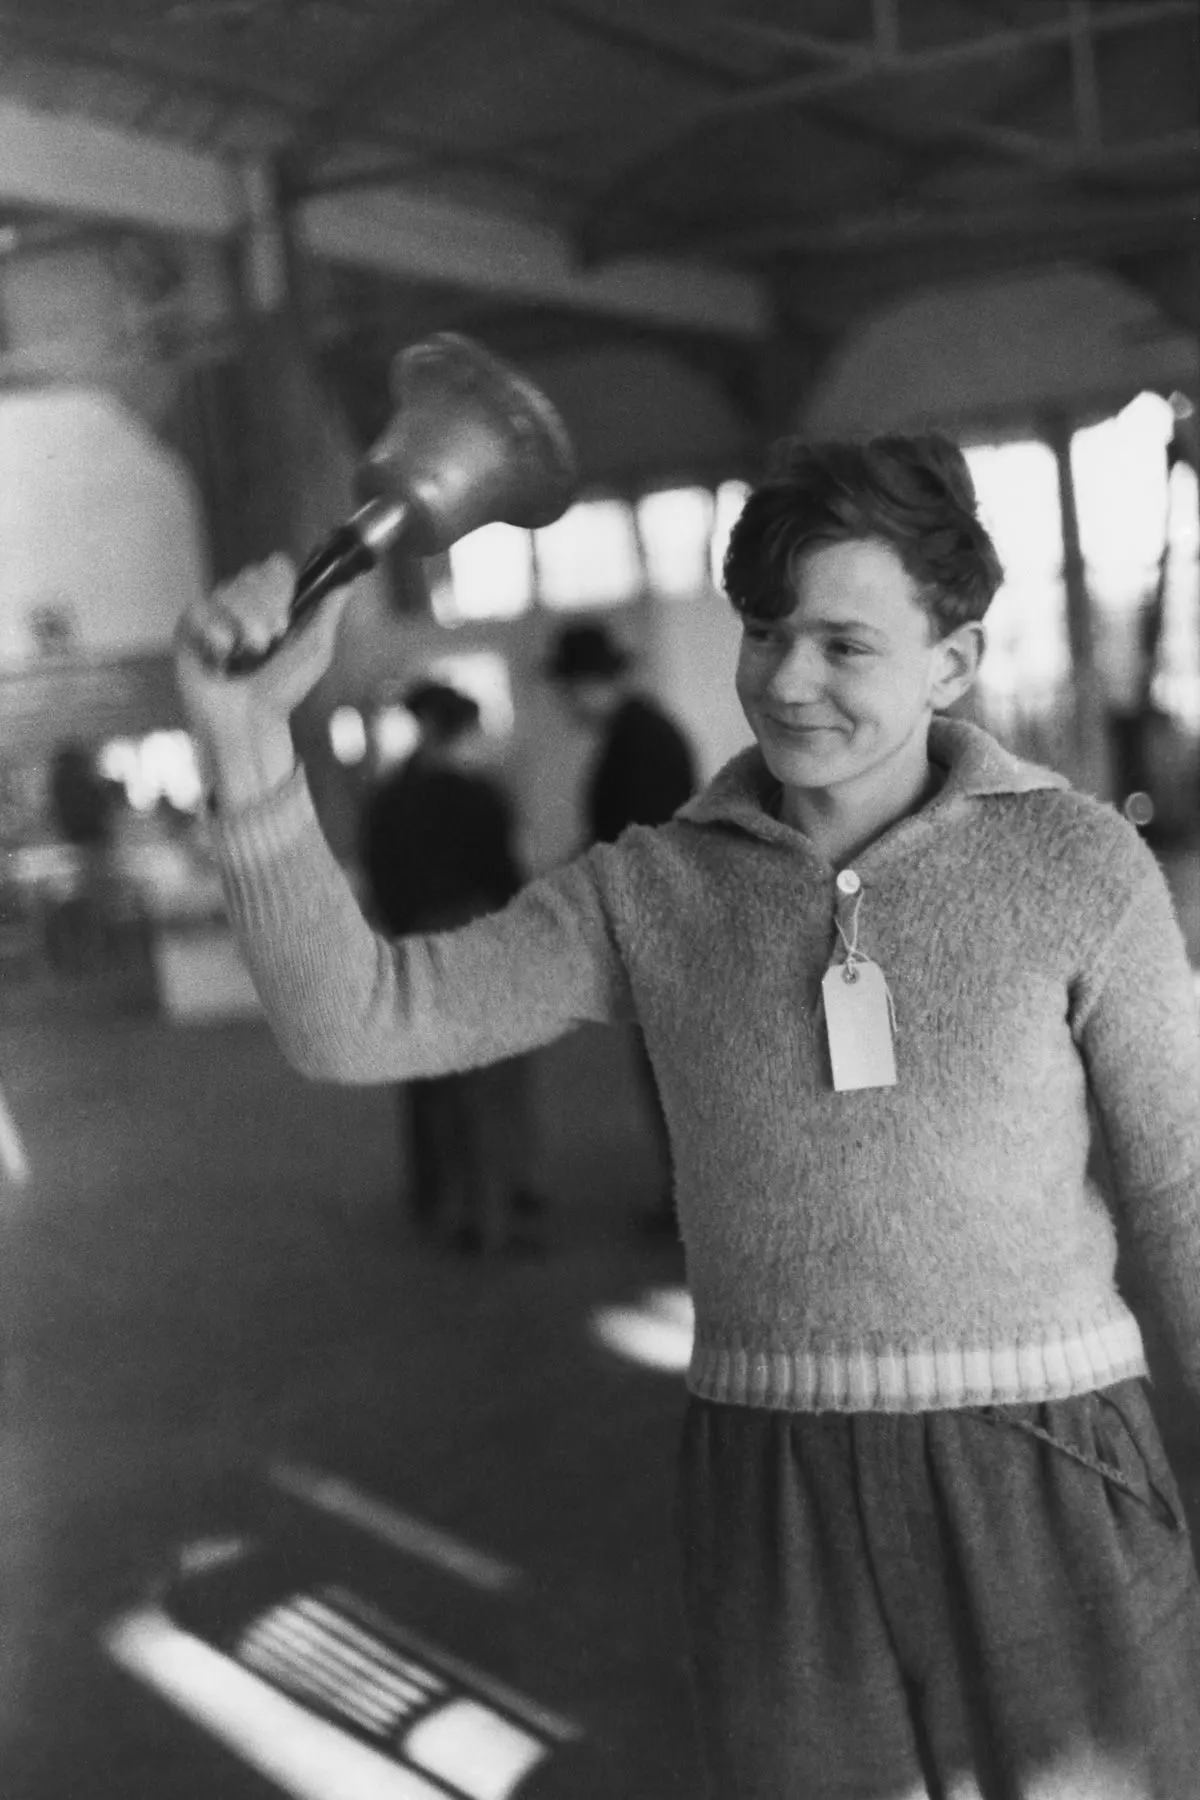 A refugee rings the dinner bell at the Dovercourt holiday camp, 1938.